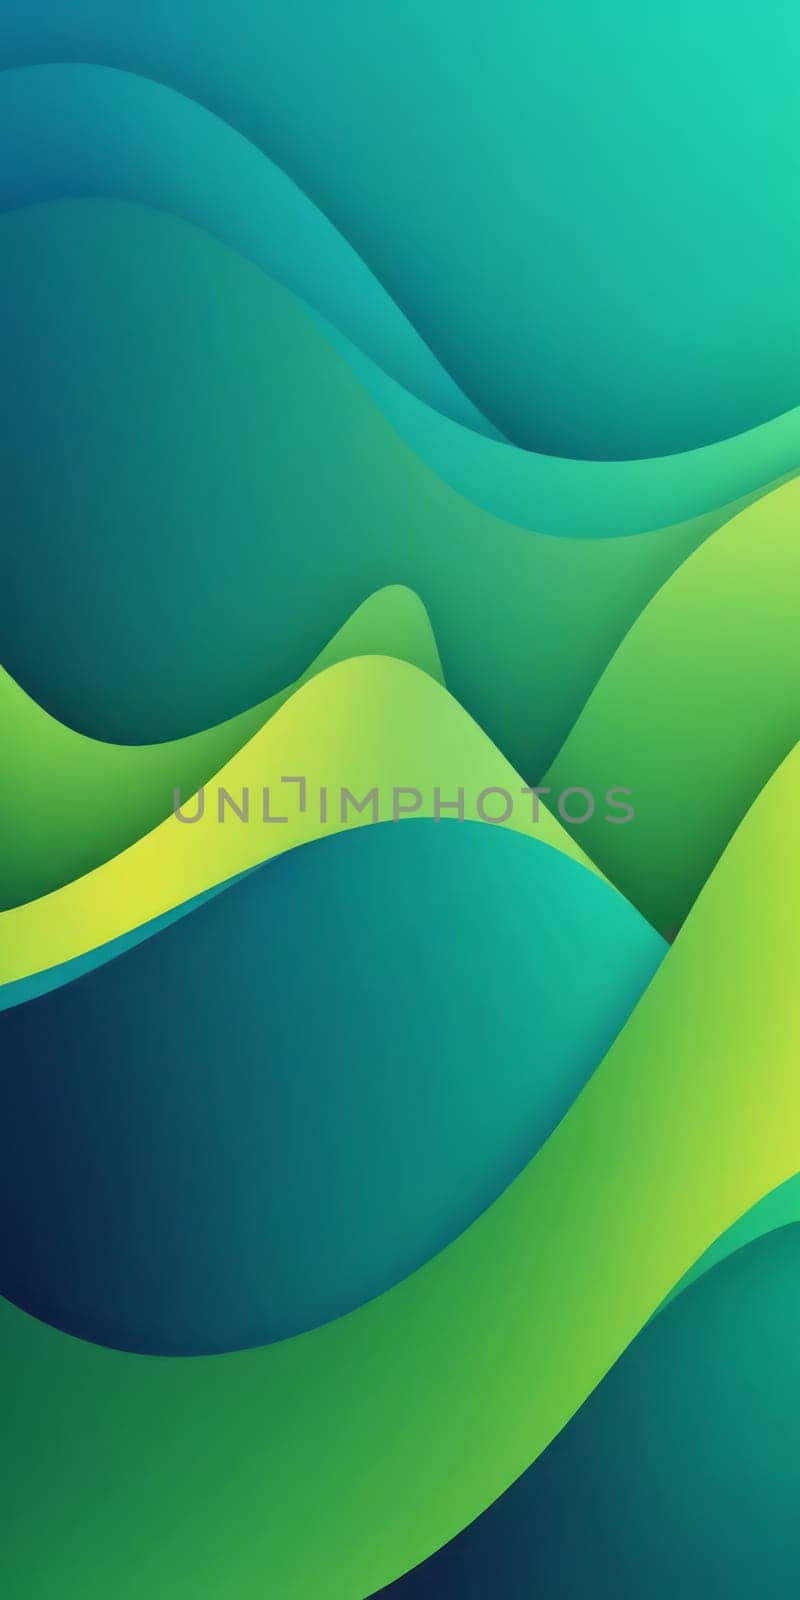 Waved Shapes in Green Cyan by nkotlyar